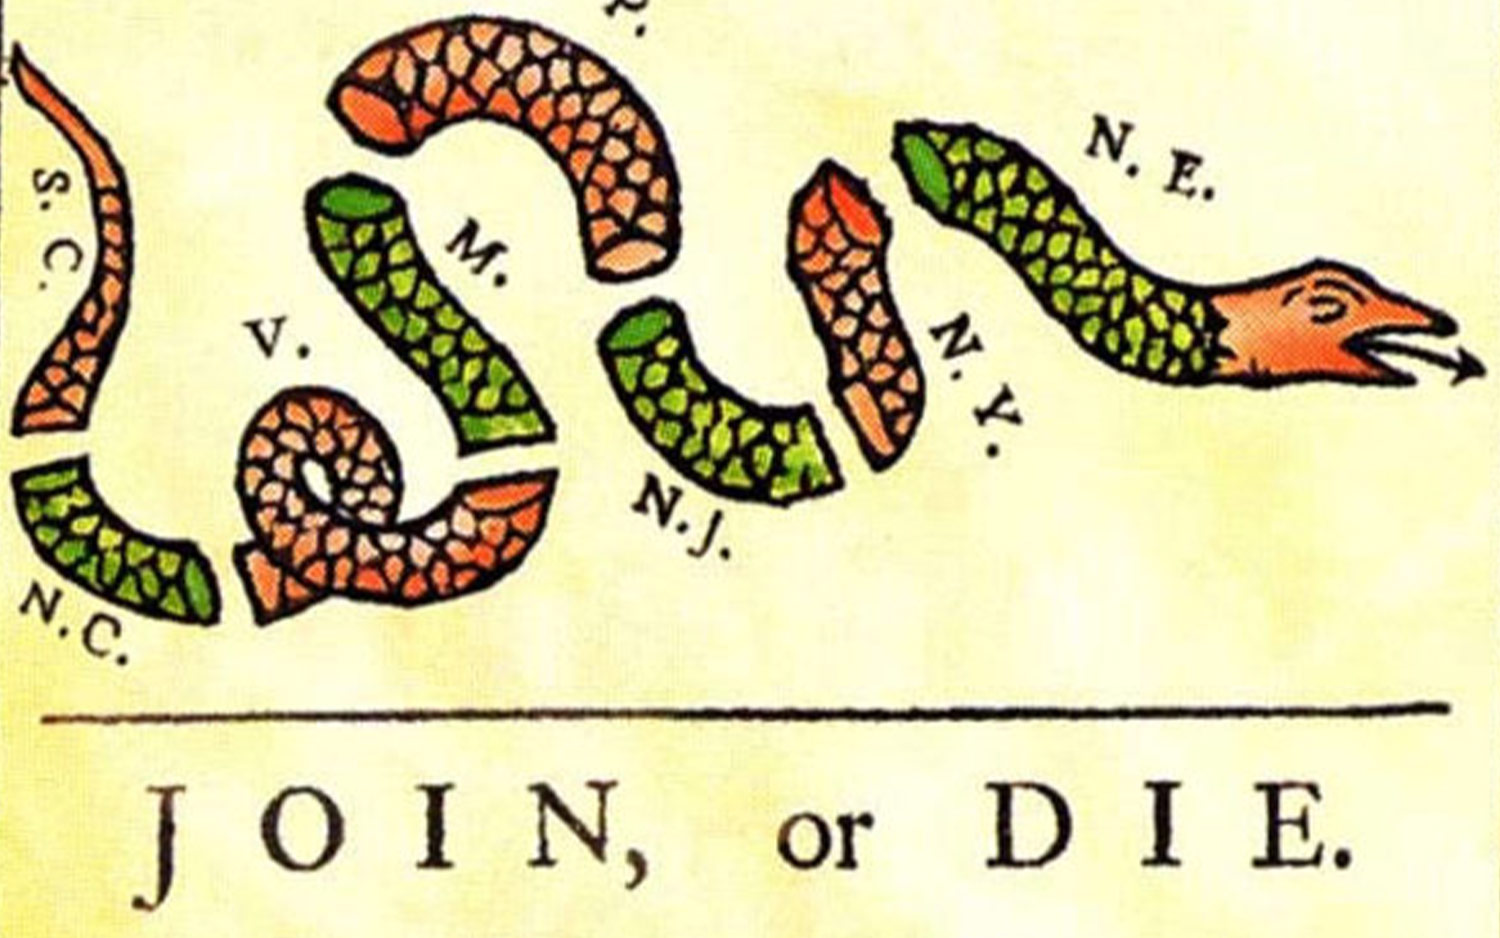 close up of the "Join or Die" flag